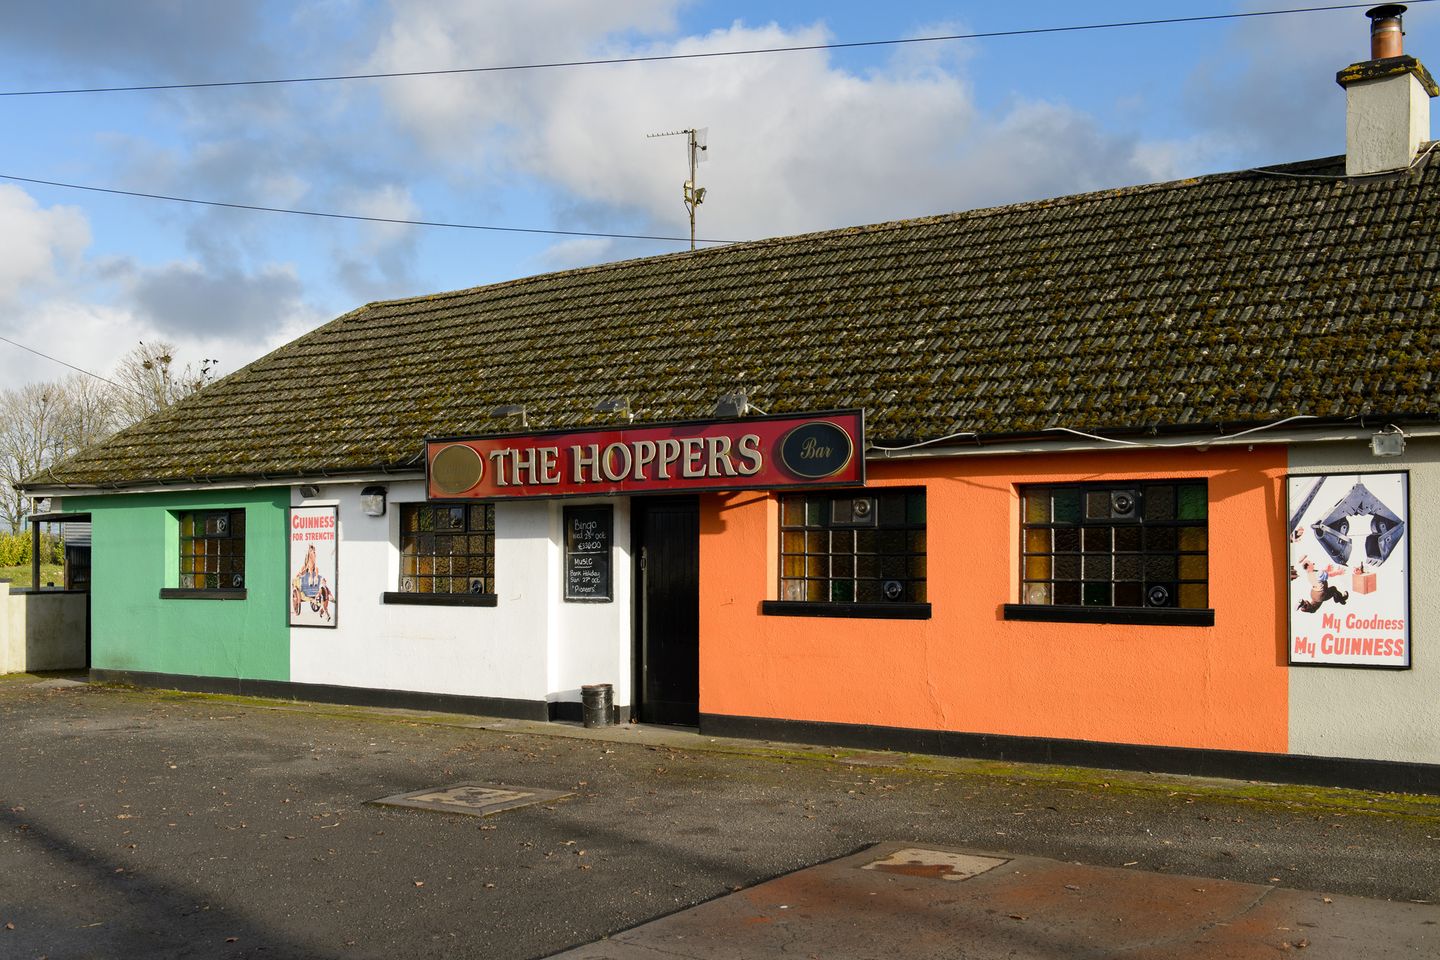 The Hoppers, Walsh Island, Co. Offaly